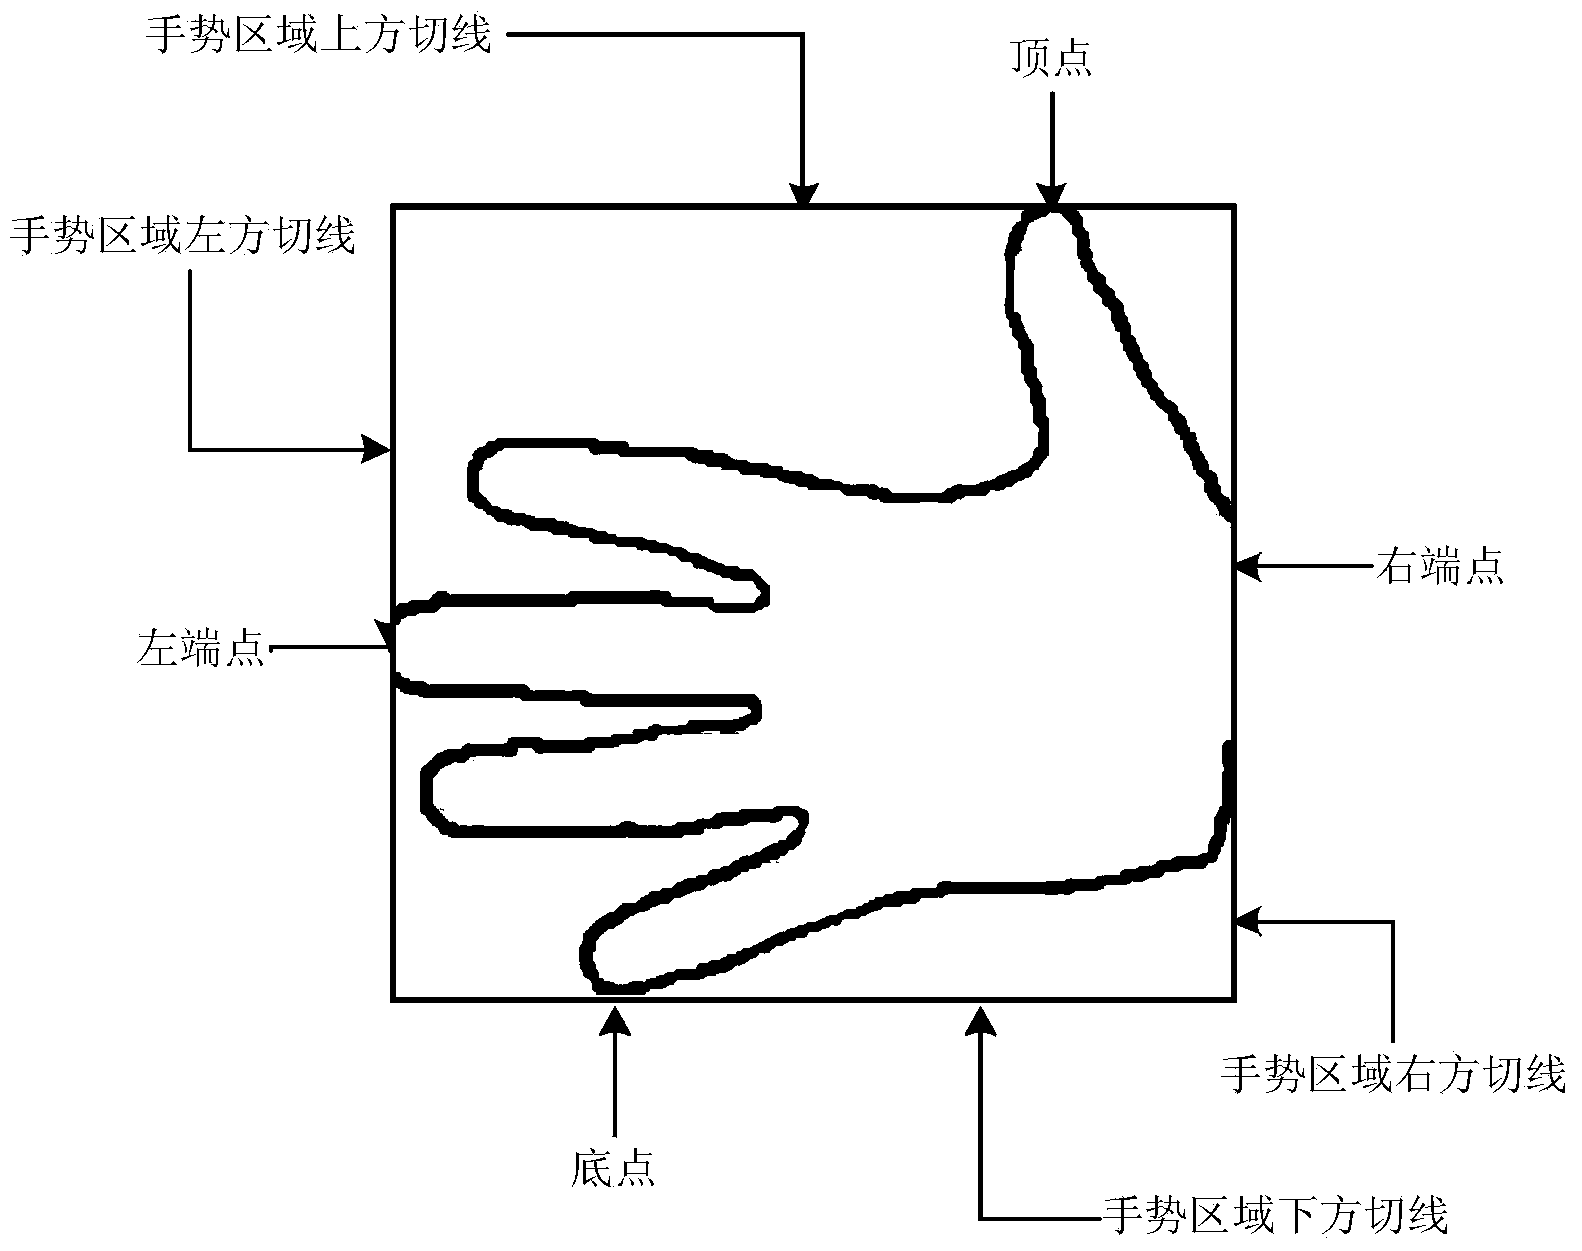 Automatic gesture recognition method